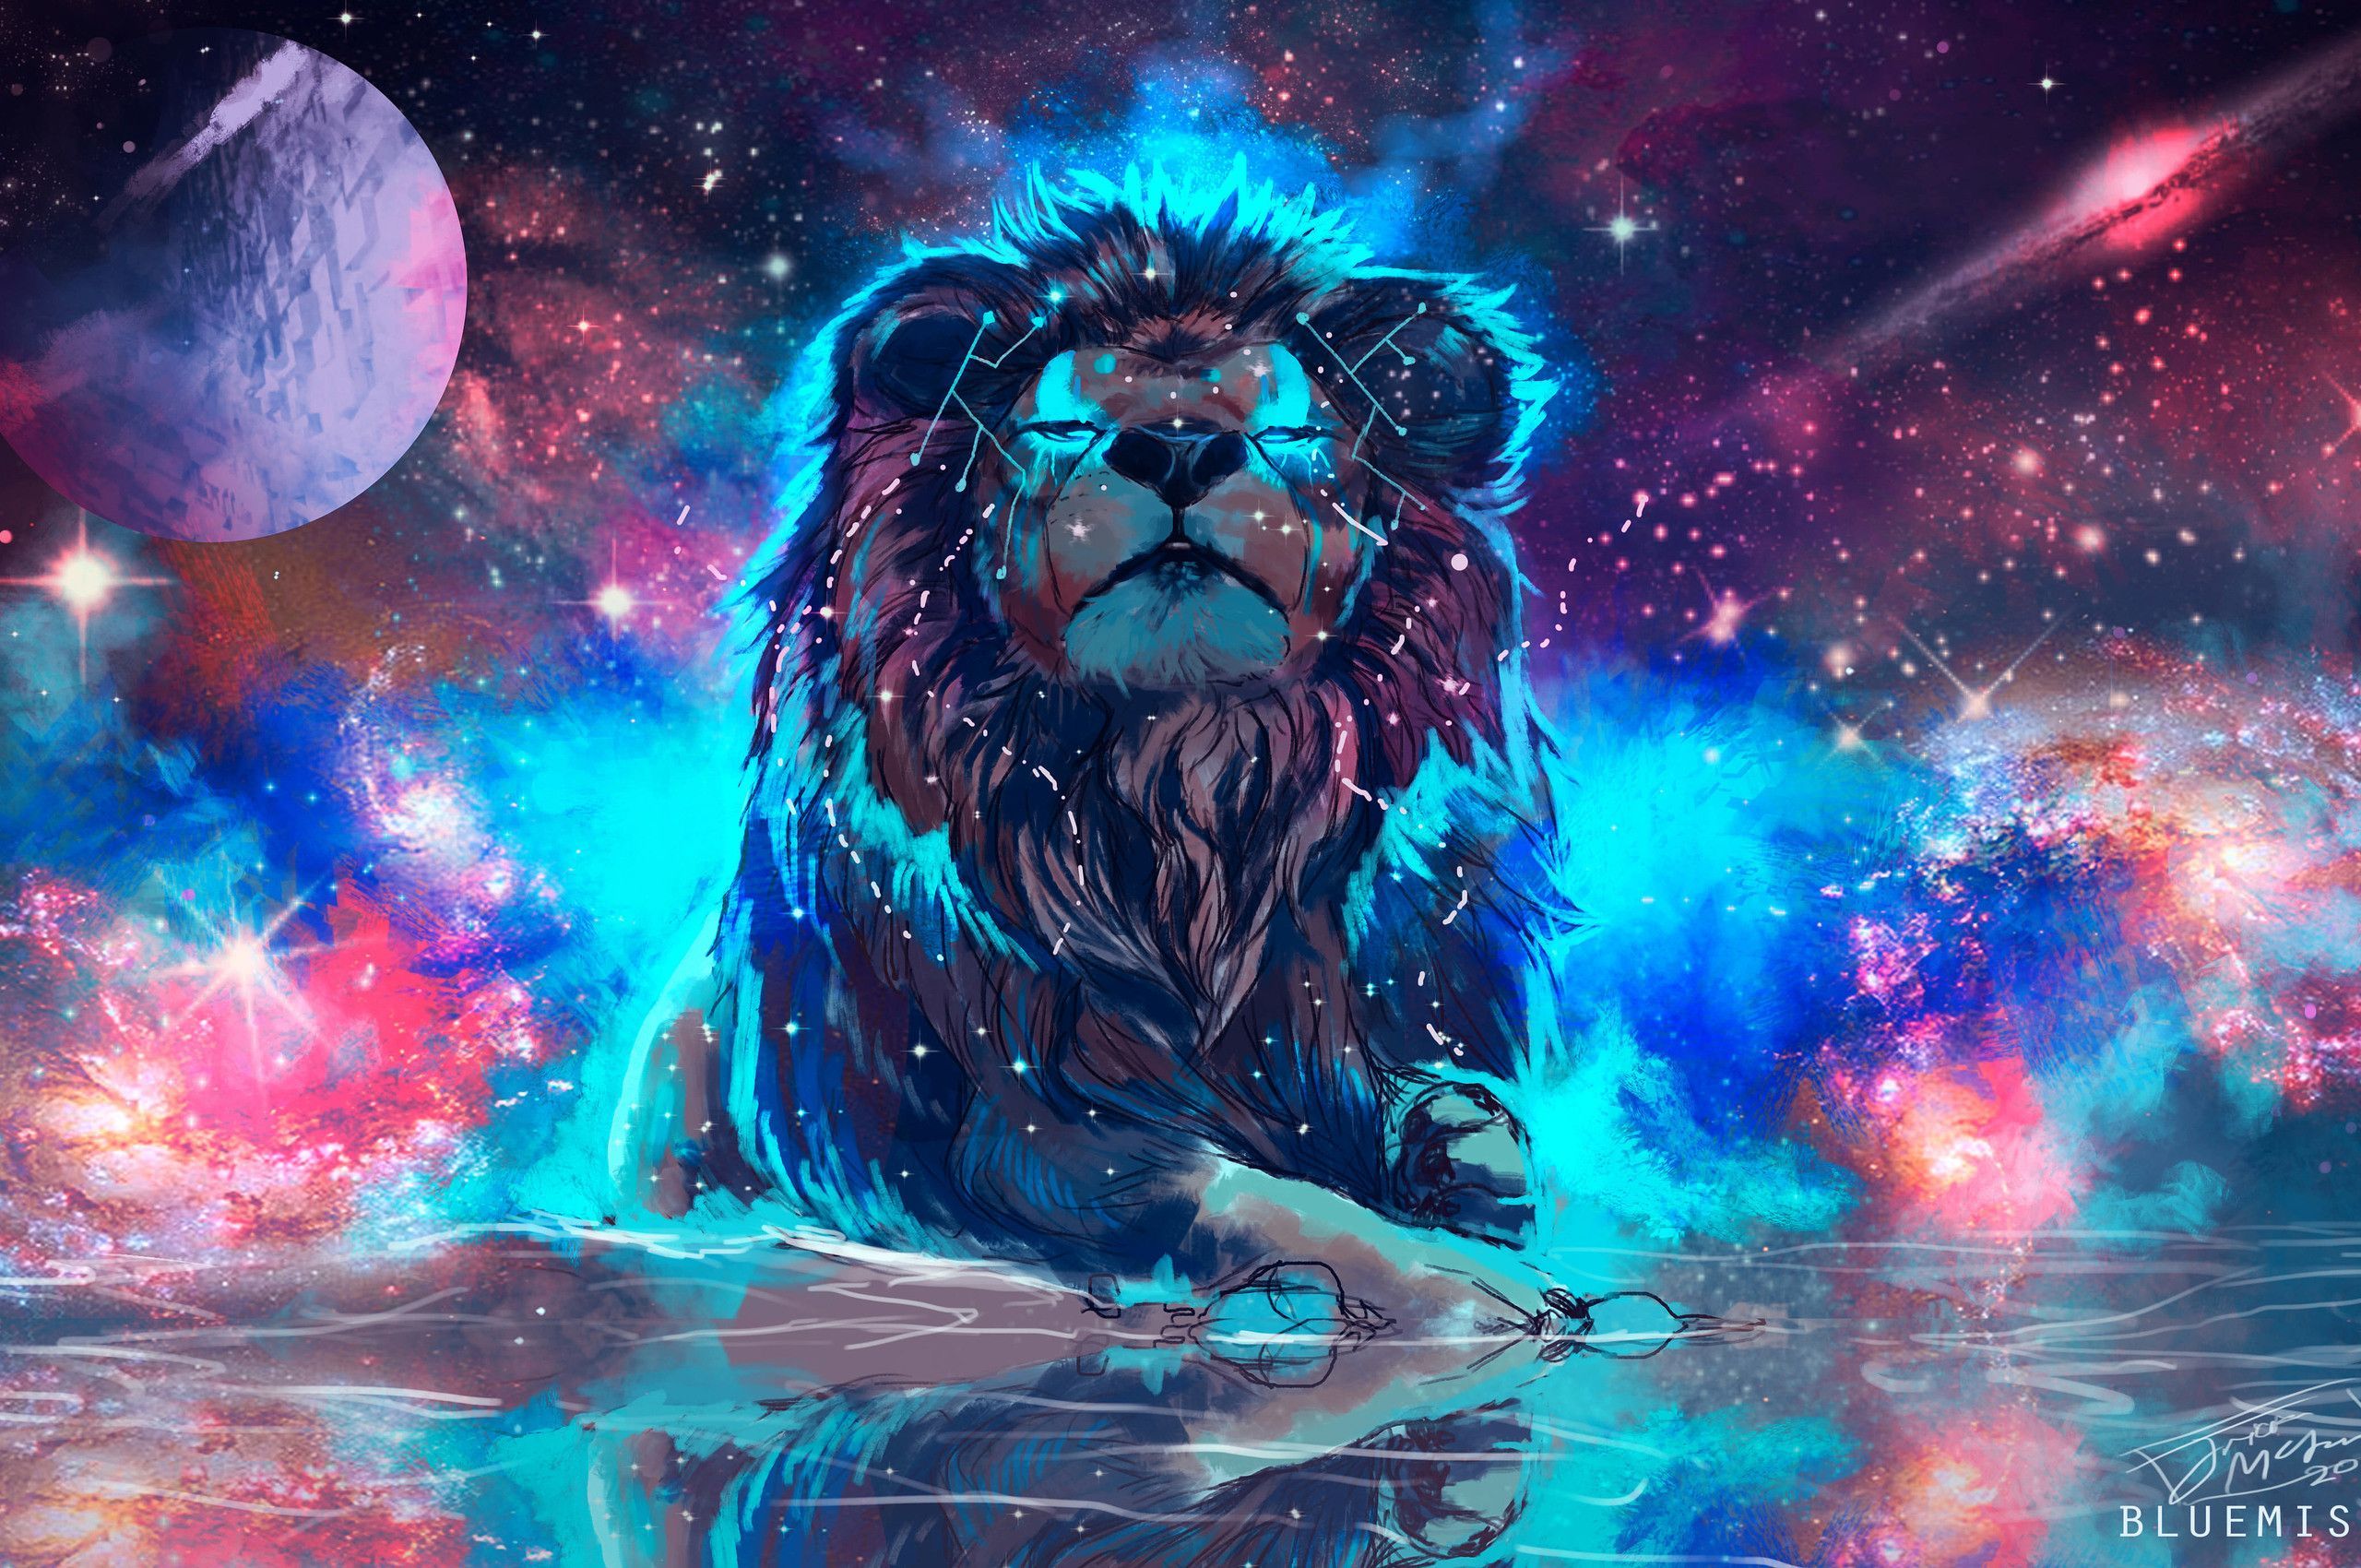 Colorful Lion Wallpaper Free Colorful Lion Background